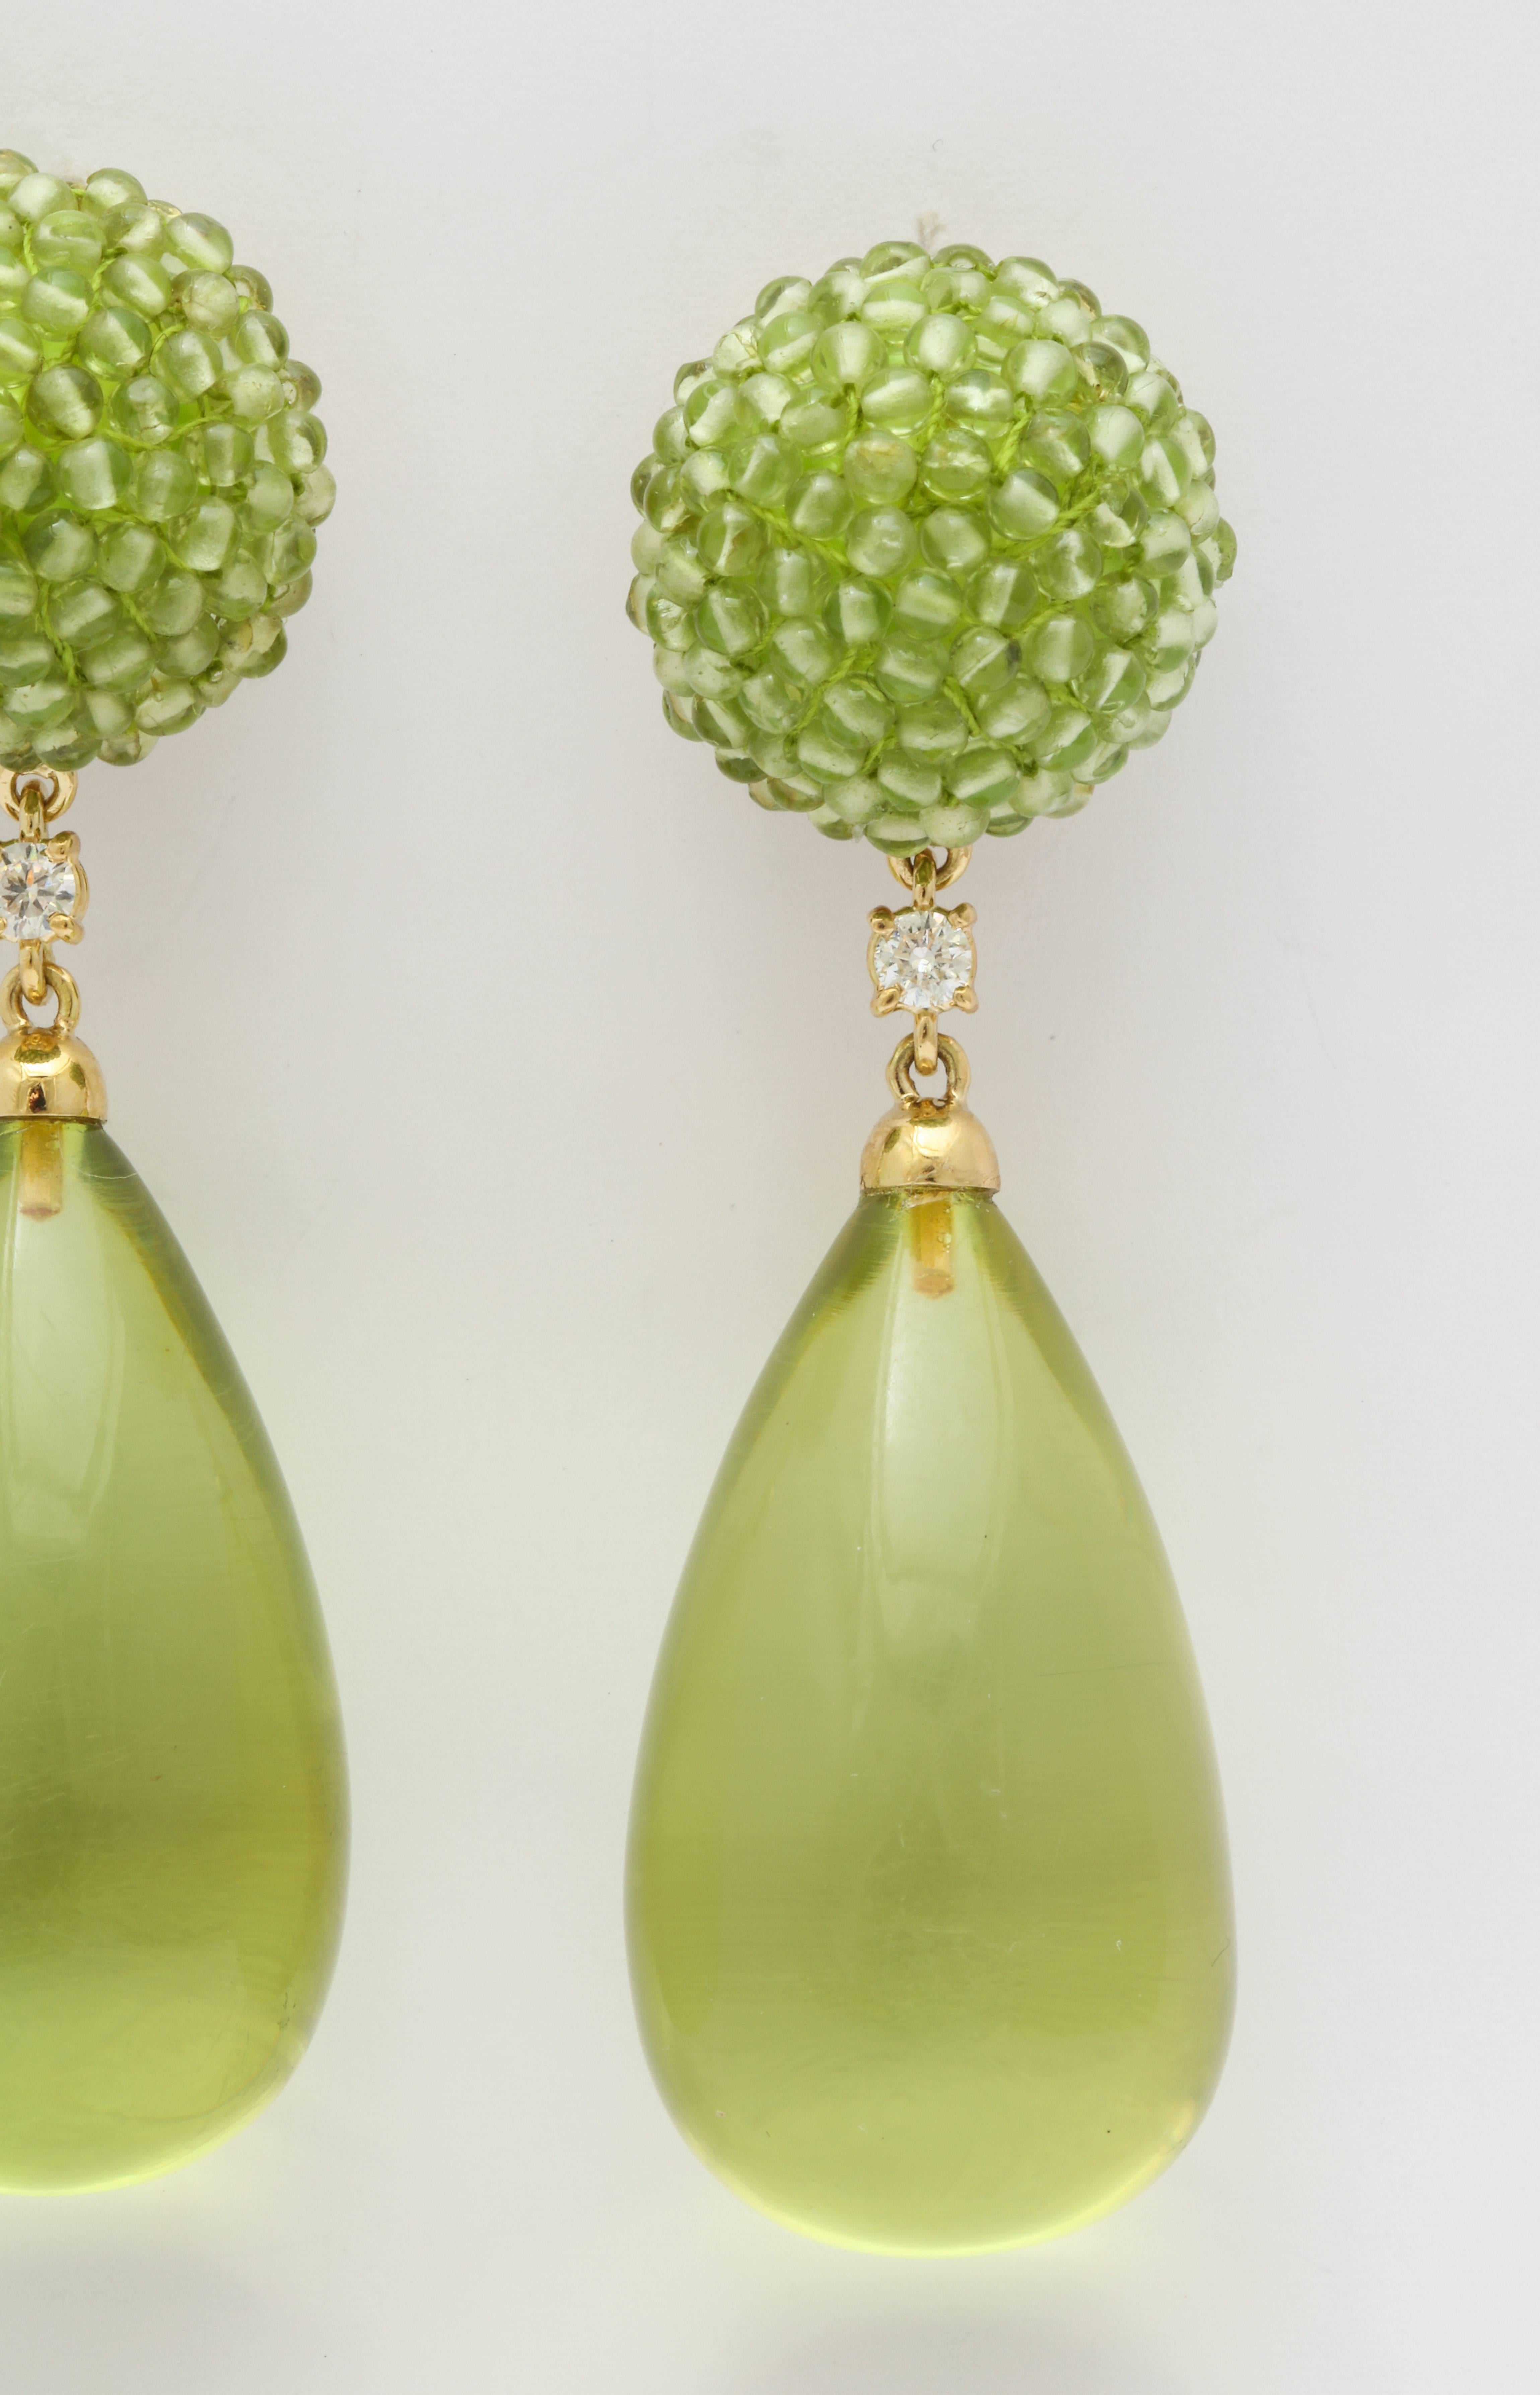 Bright, bold and fun, these great earrings are guaranteed to light up your day.  The button shaped tops are made of carefully strung peridot beads and the drops are made of amber.  Connecting the two are round diamonds and the mounting is 18kt gold.